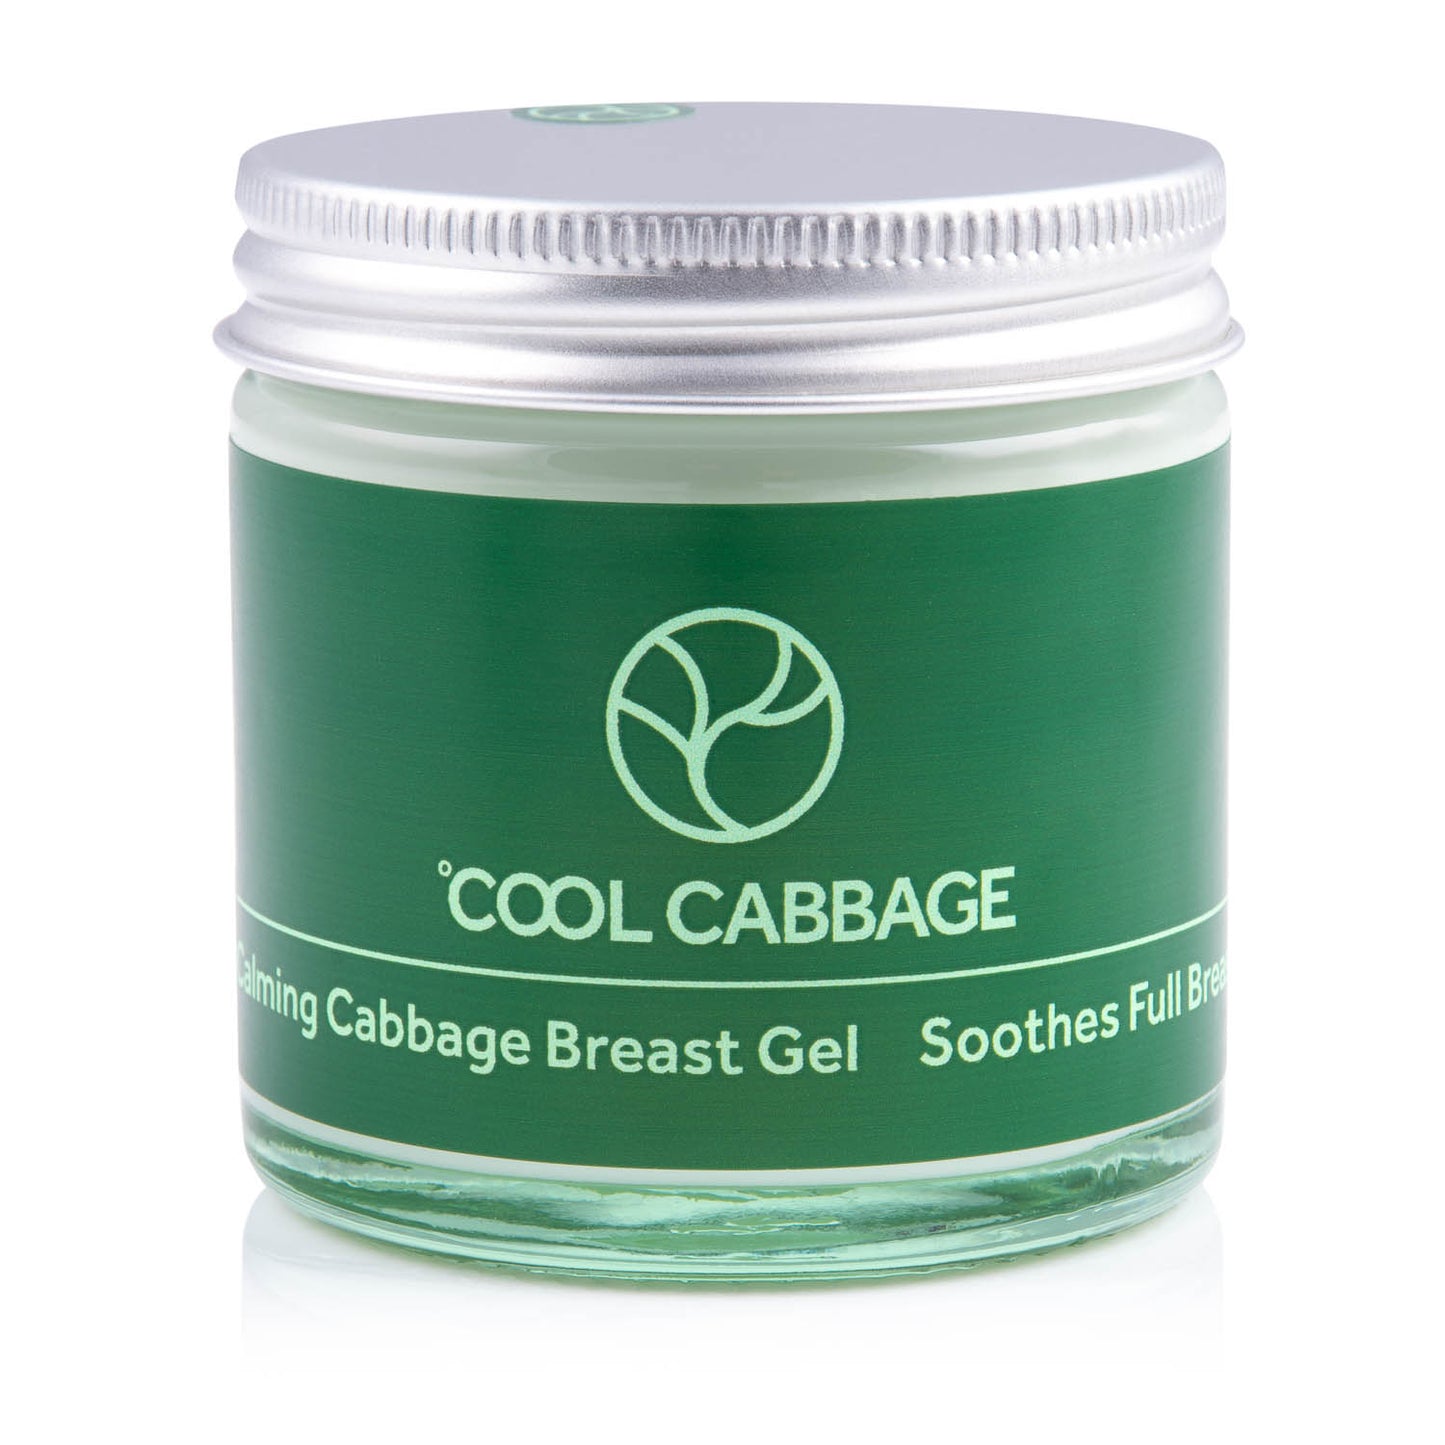 cabbage breast cream for pregnancy and breastfeeding by Cool Cabbage